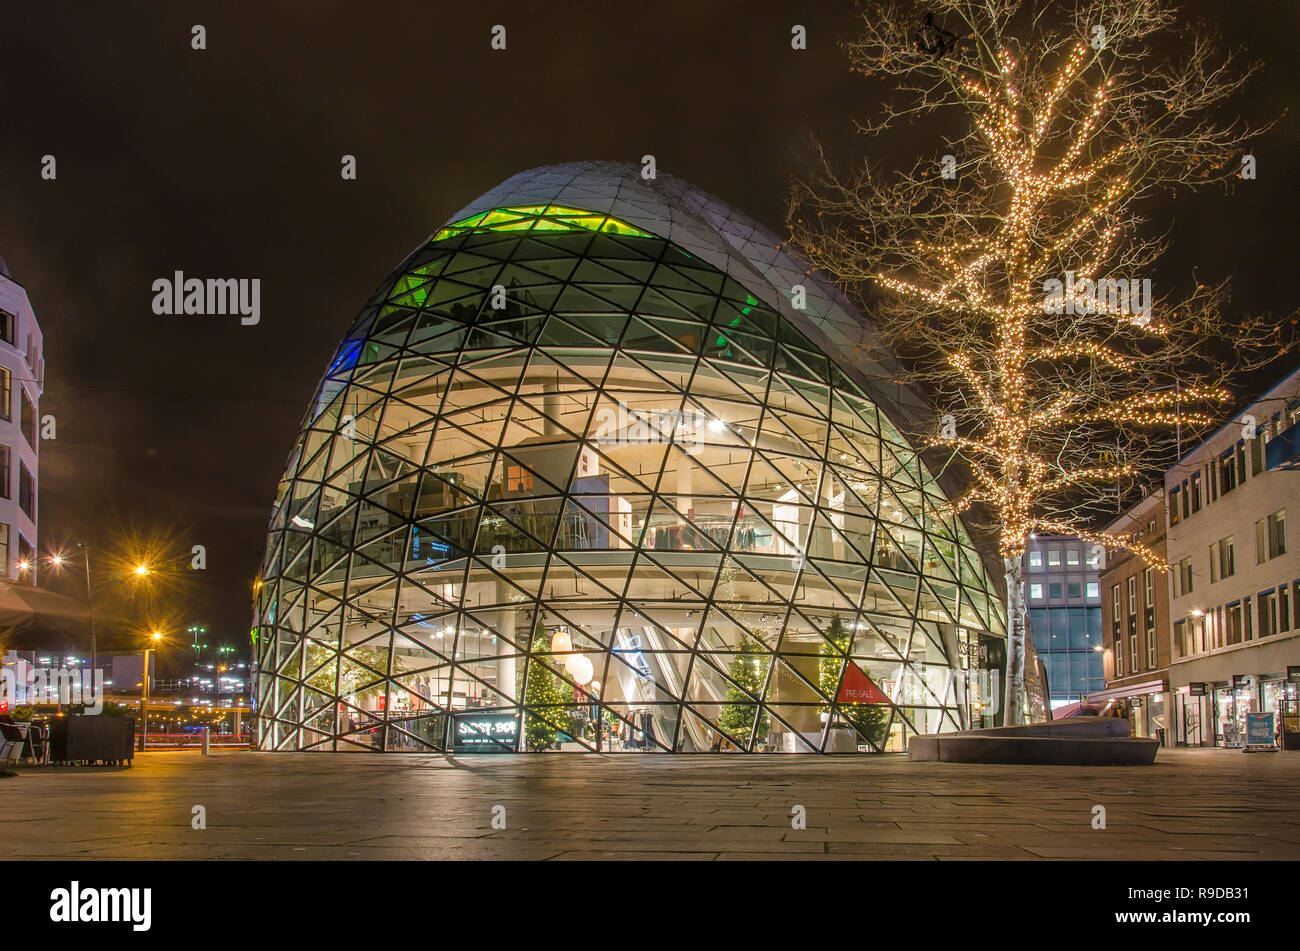 Eindhoven, The Netherlands, December 14, 2018: Glass dome-shaped clothing store and tree with Christmas decorations on Emmasingel at night Stock Photo